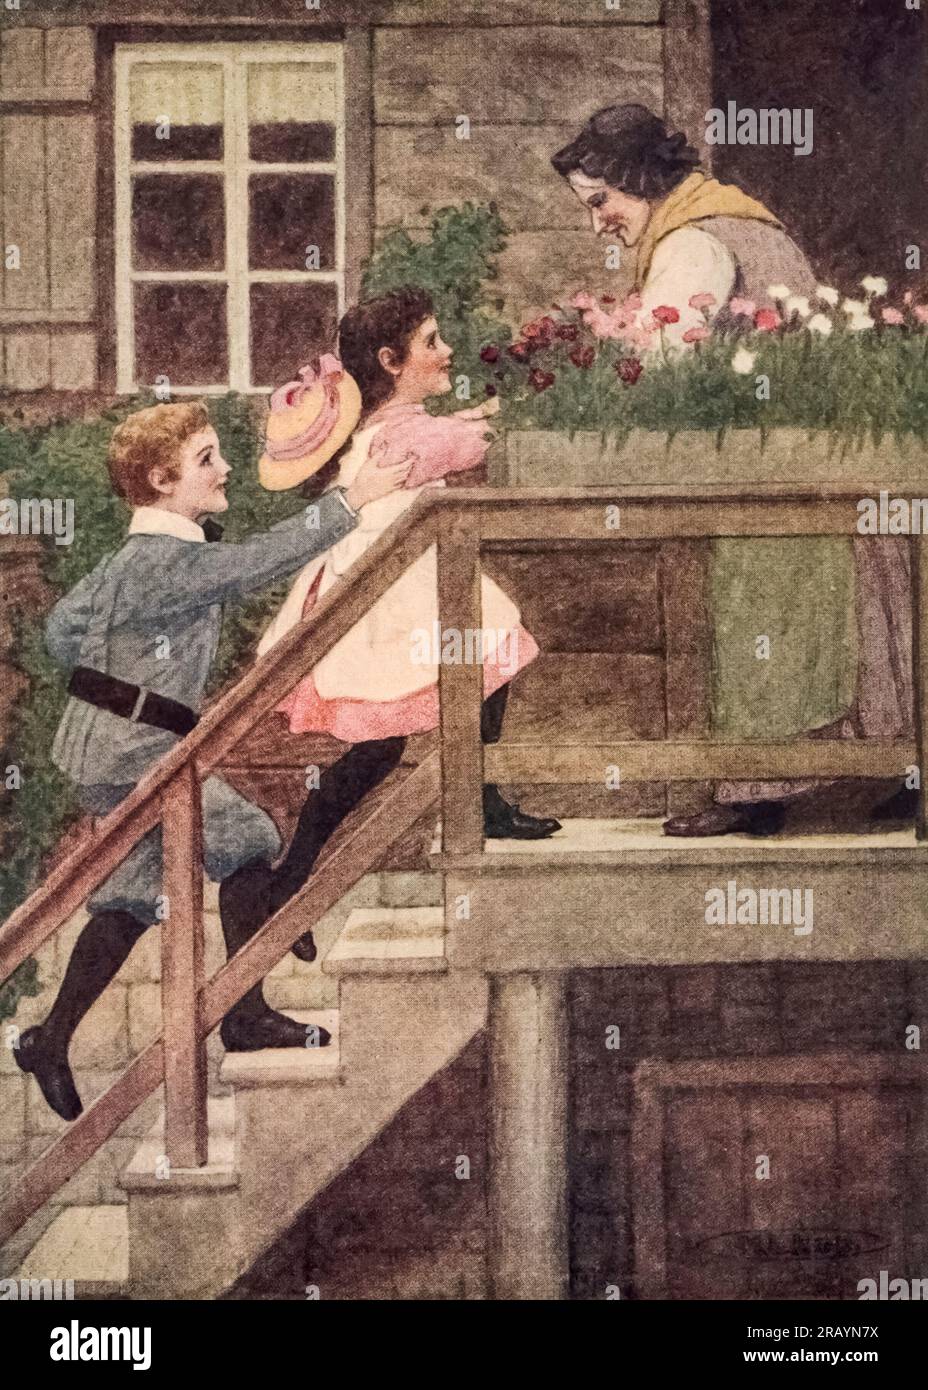 Now Both Came Flying up the Steps, and Martha Ran Out to Meet Them illustrated by Maria L. Kirk from the book ' Cornelli ' by Spyri, Johanna, 1827-1901 Publication date 1920 Publisher Philadelphia, London, J.B. Lippincott company Johanna Louise Spyri (12 June 1827 – 7 July 1901) was a Swiss author of novels, notably children's stories. She wrote the popular book Heidi. Born in Hirzel, a rural area in the canton of Zürich, as a child she spent several summers near Chur in Graubünden, the setting she later would use in her novels. Stock Photo